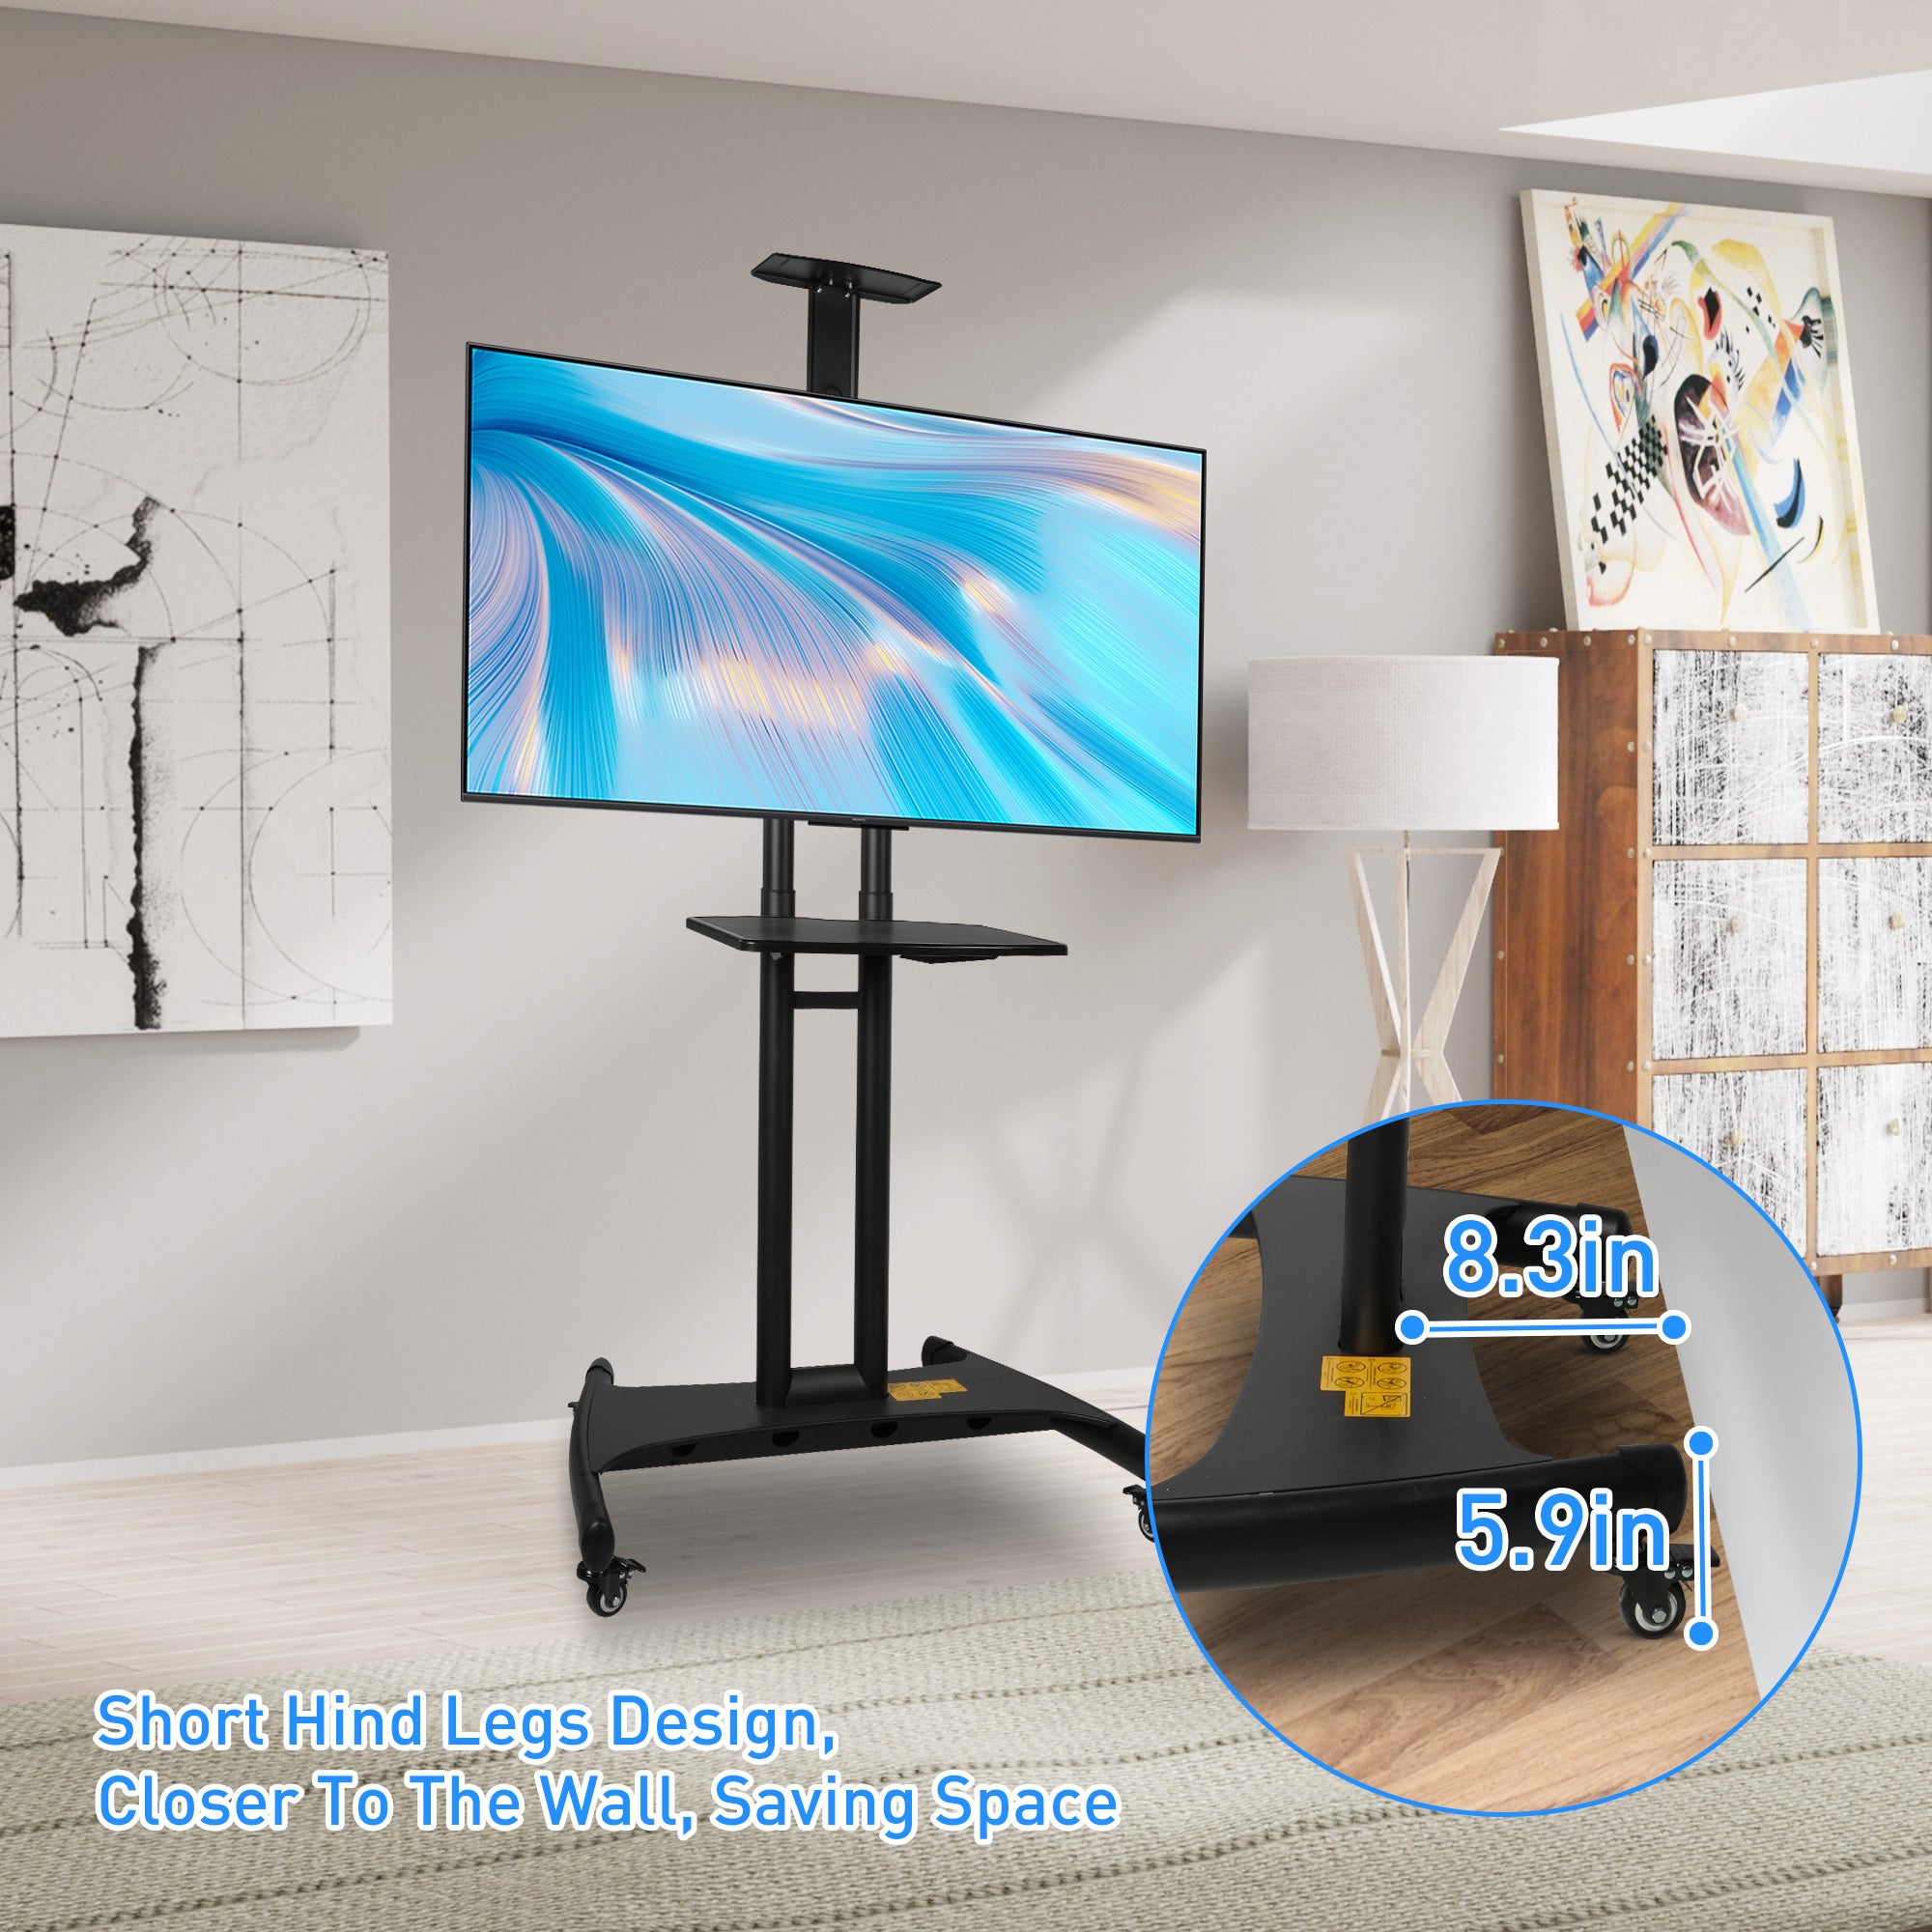 Portable Mobile TV Stand with Wheels for 32-70 Inch Flat Screen TVs - Tall TV Cart with Adjustable Height AV/Camera Shelf, Supports Up to 100lbs, Max VESA 600x400mm